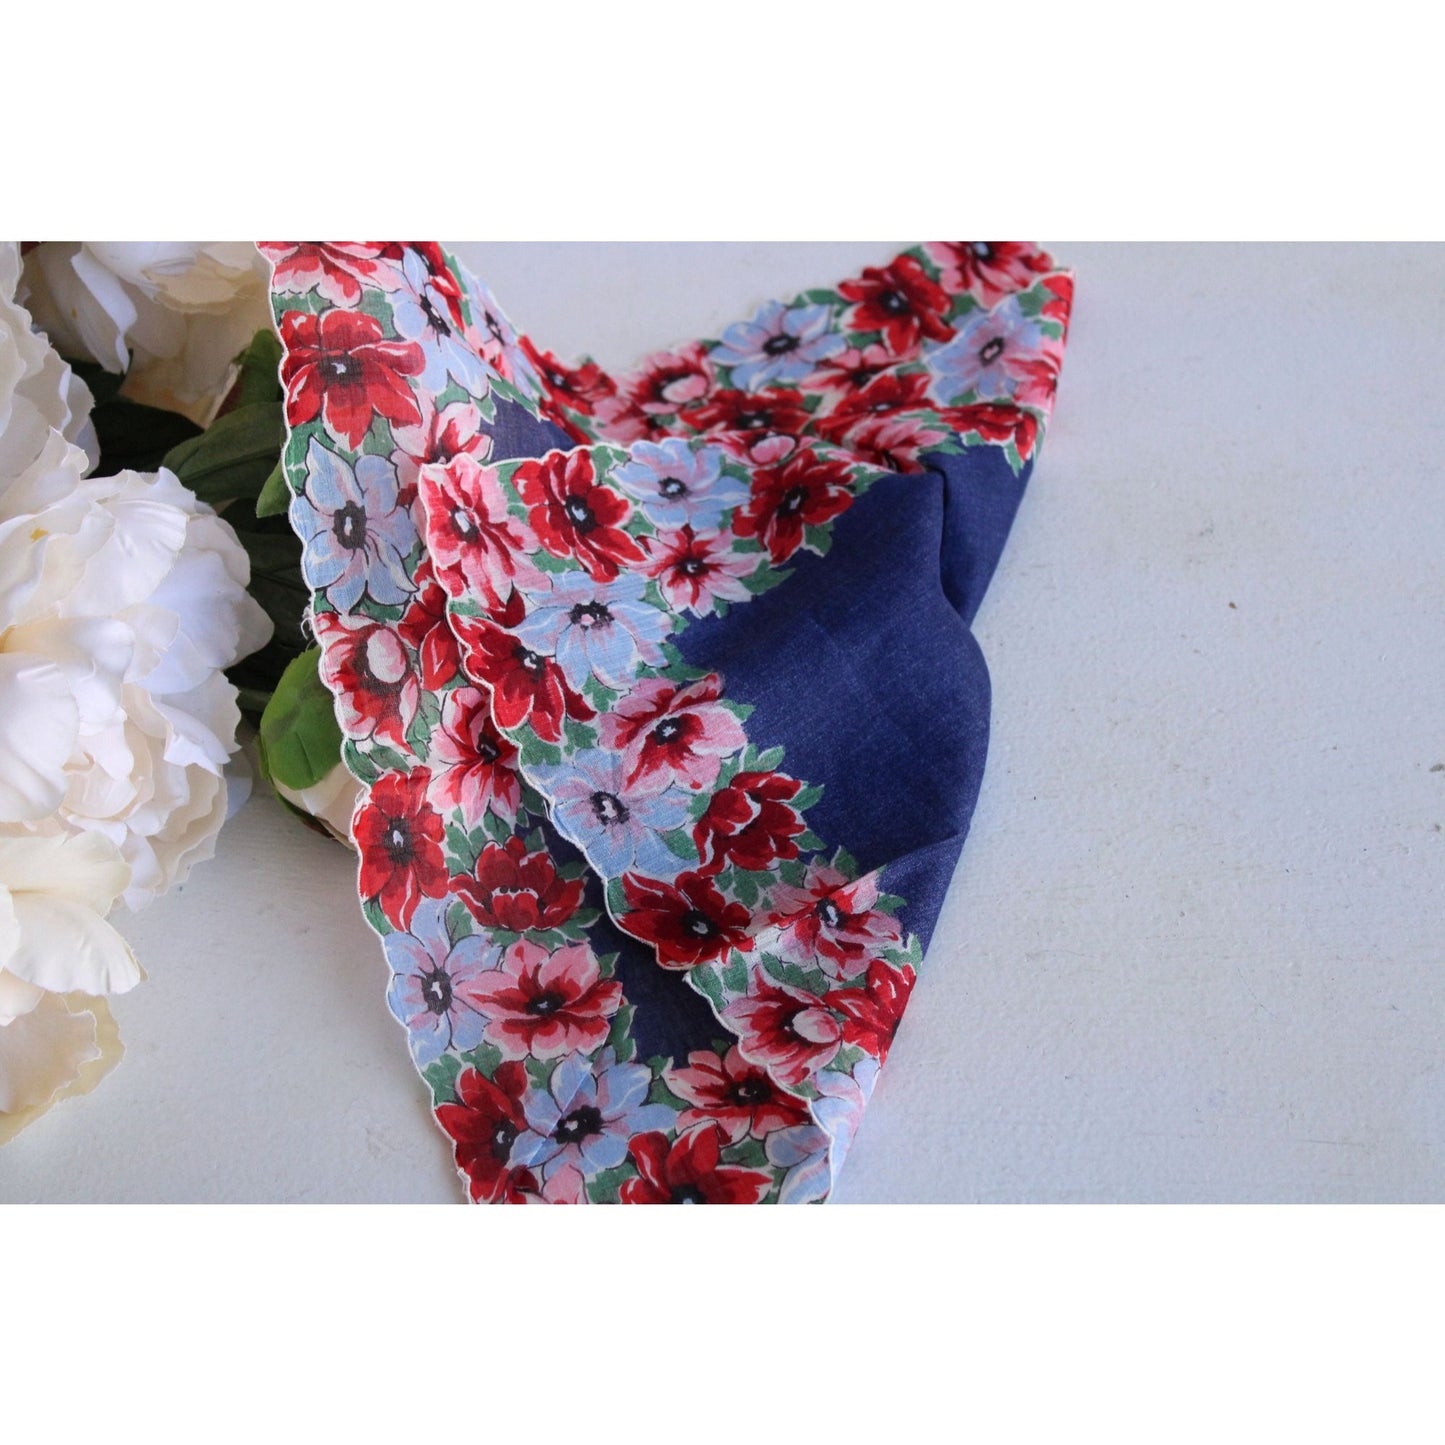 Vintage Navy Blue Cotton With Red Floral Print Hankie